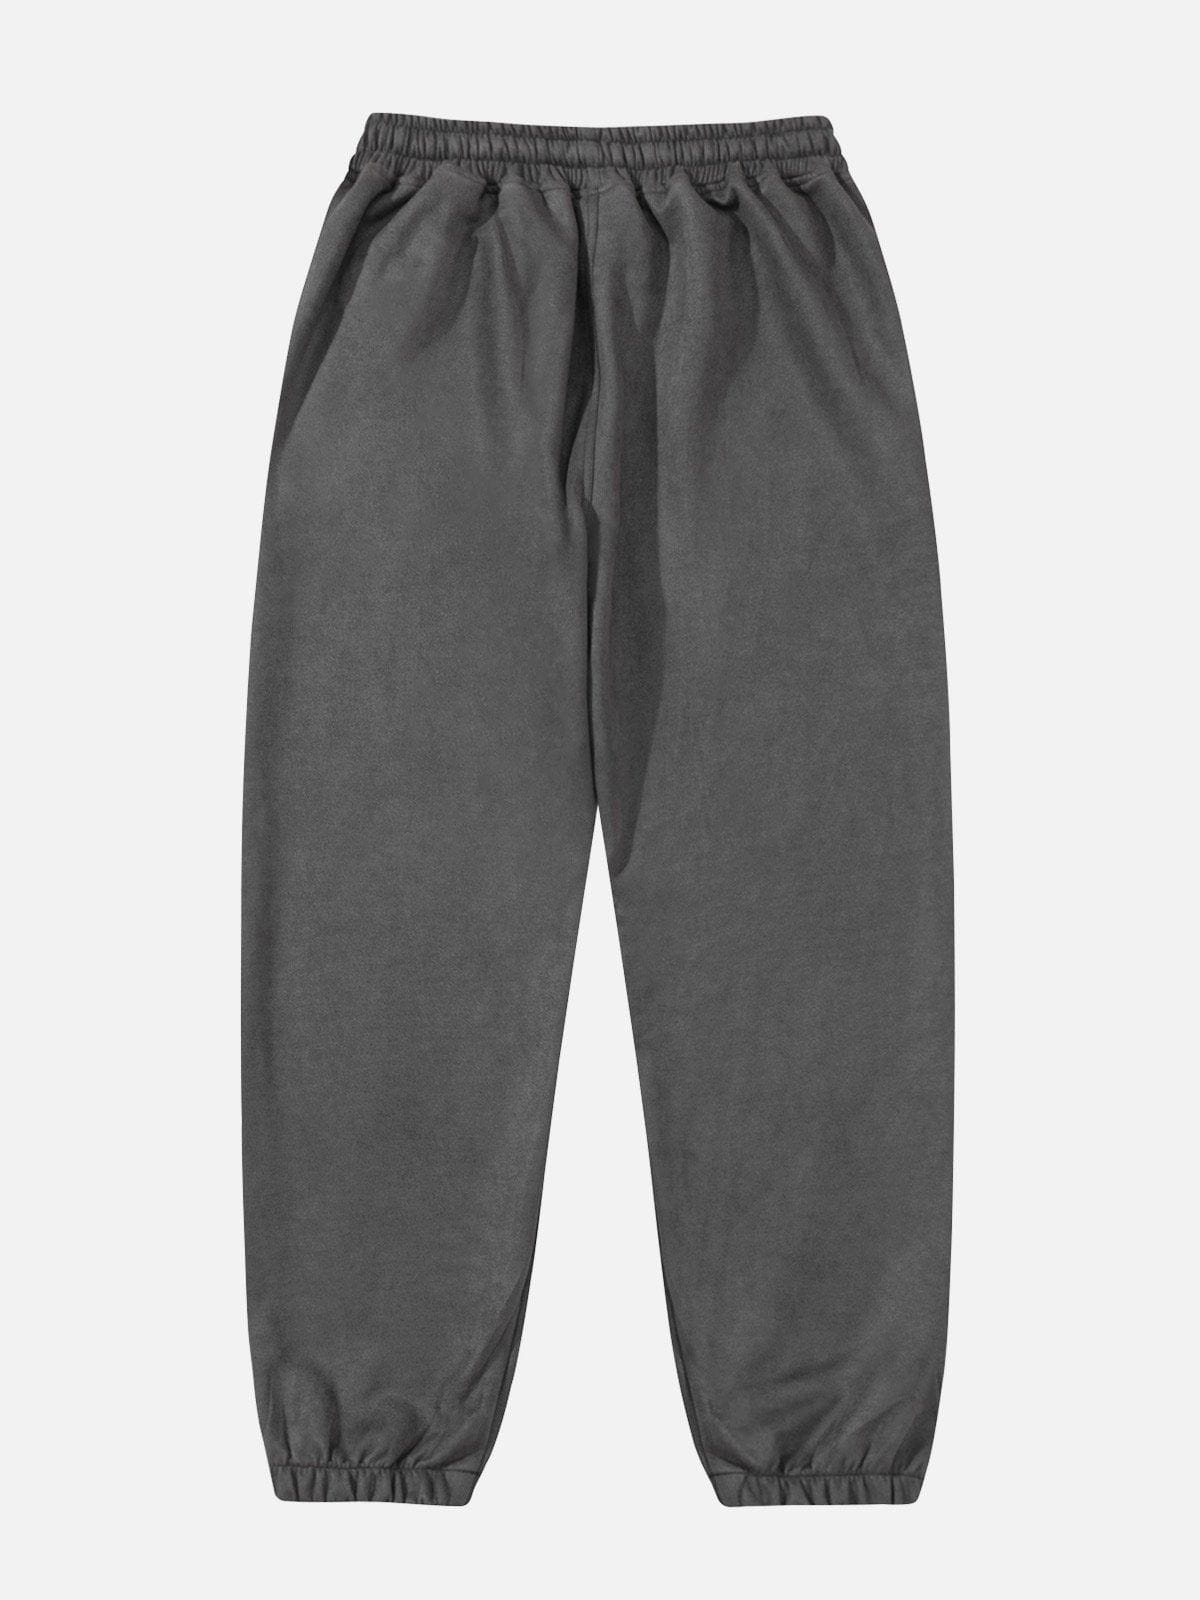 Aelfric Eden Funny Little People Print Sweatpants [Recommended by @iammanu.seven7]